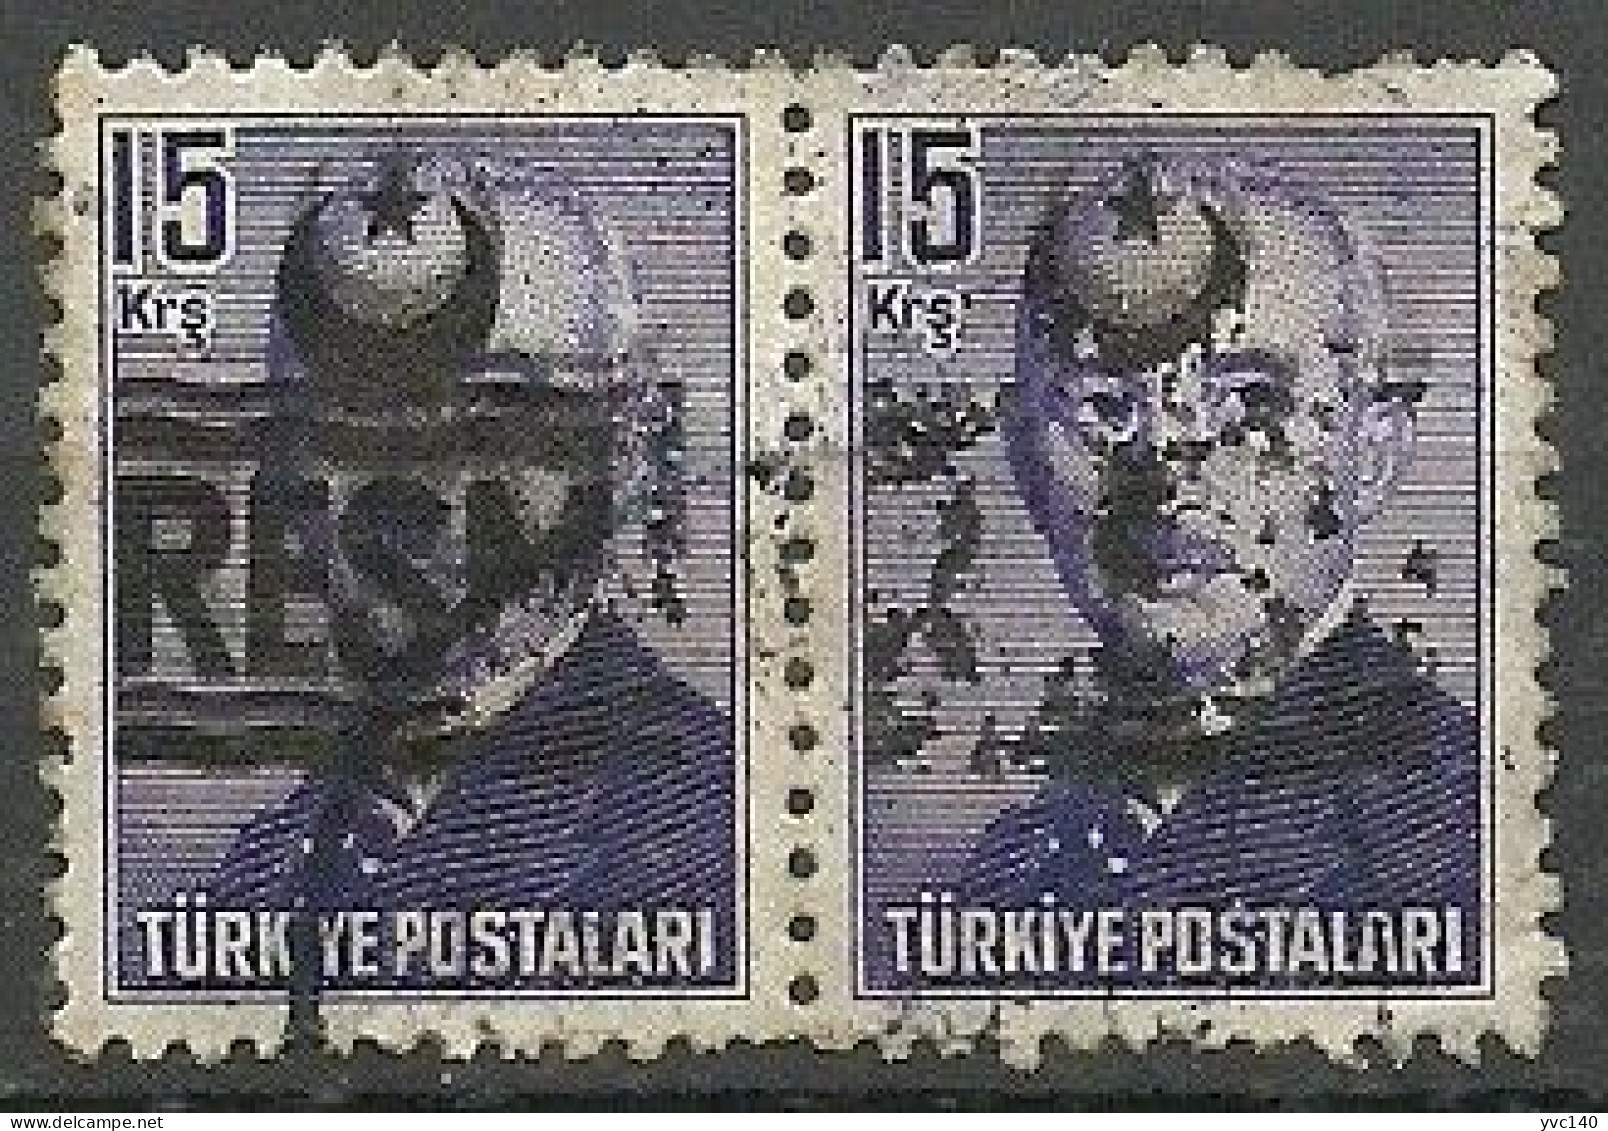 Turkey; 1955 Official Stamp 15 K. "Double Overprint ERROR" - Official Stamps